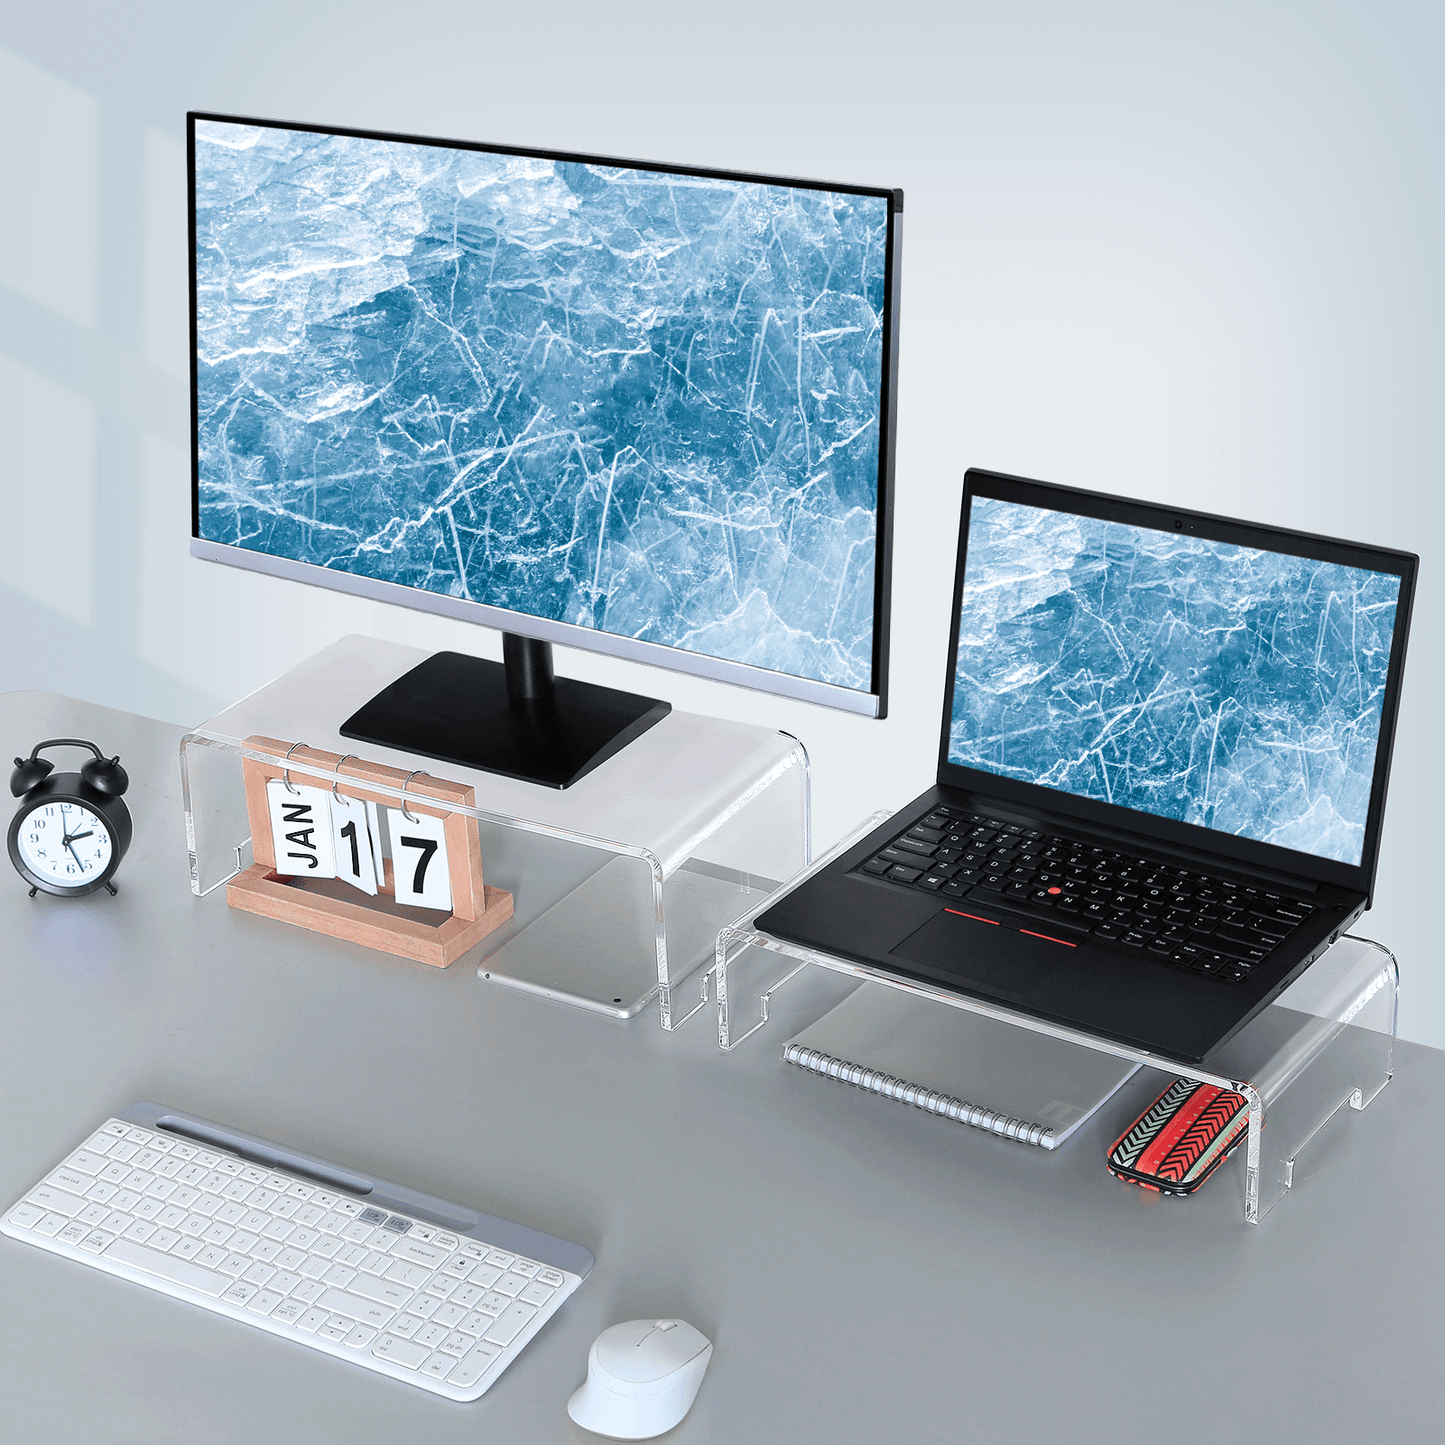 acryliclaptop stand for desk organization